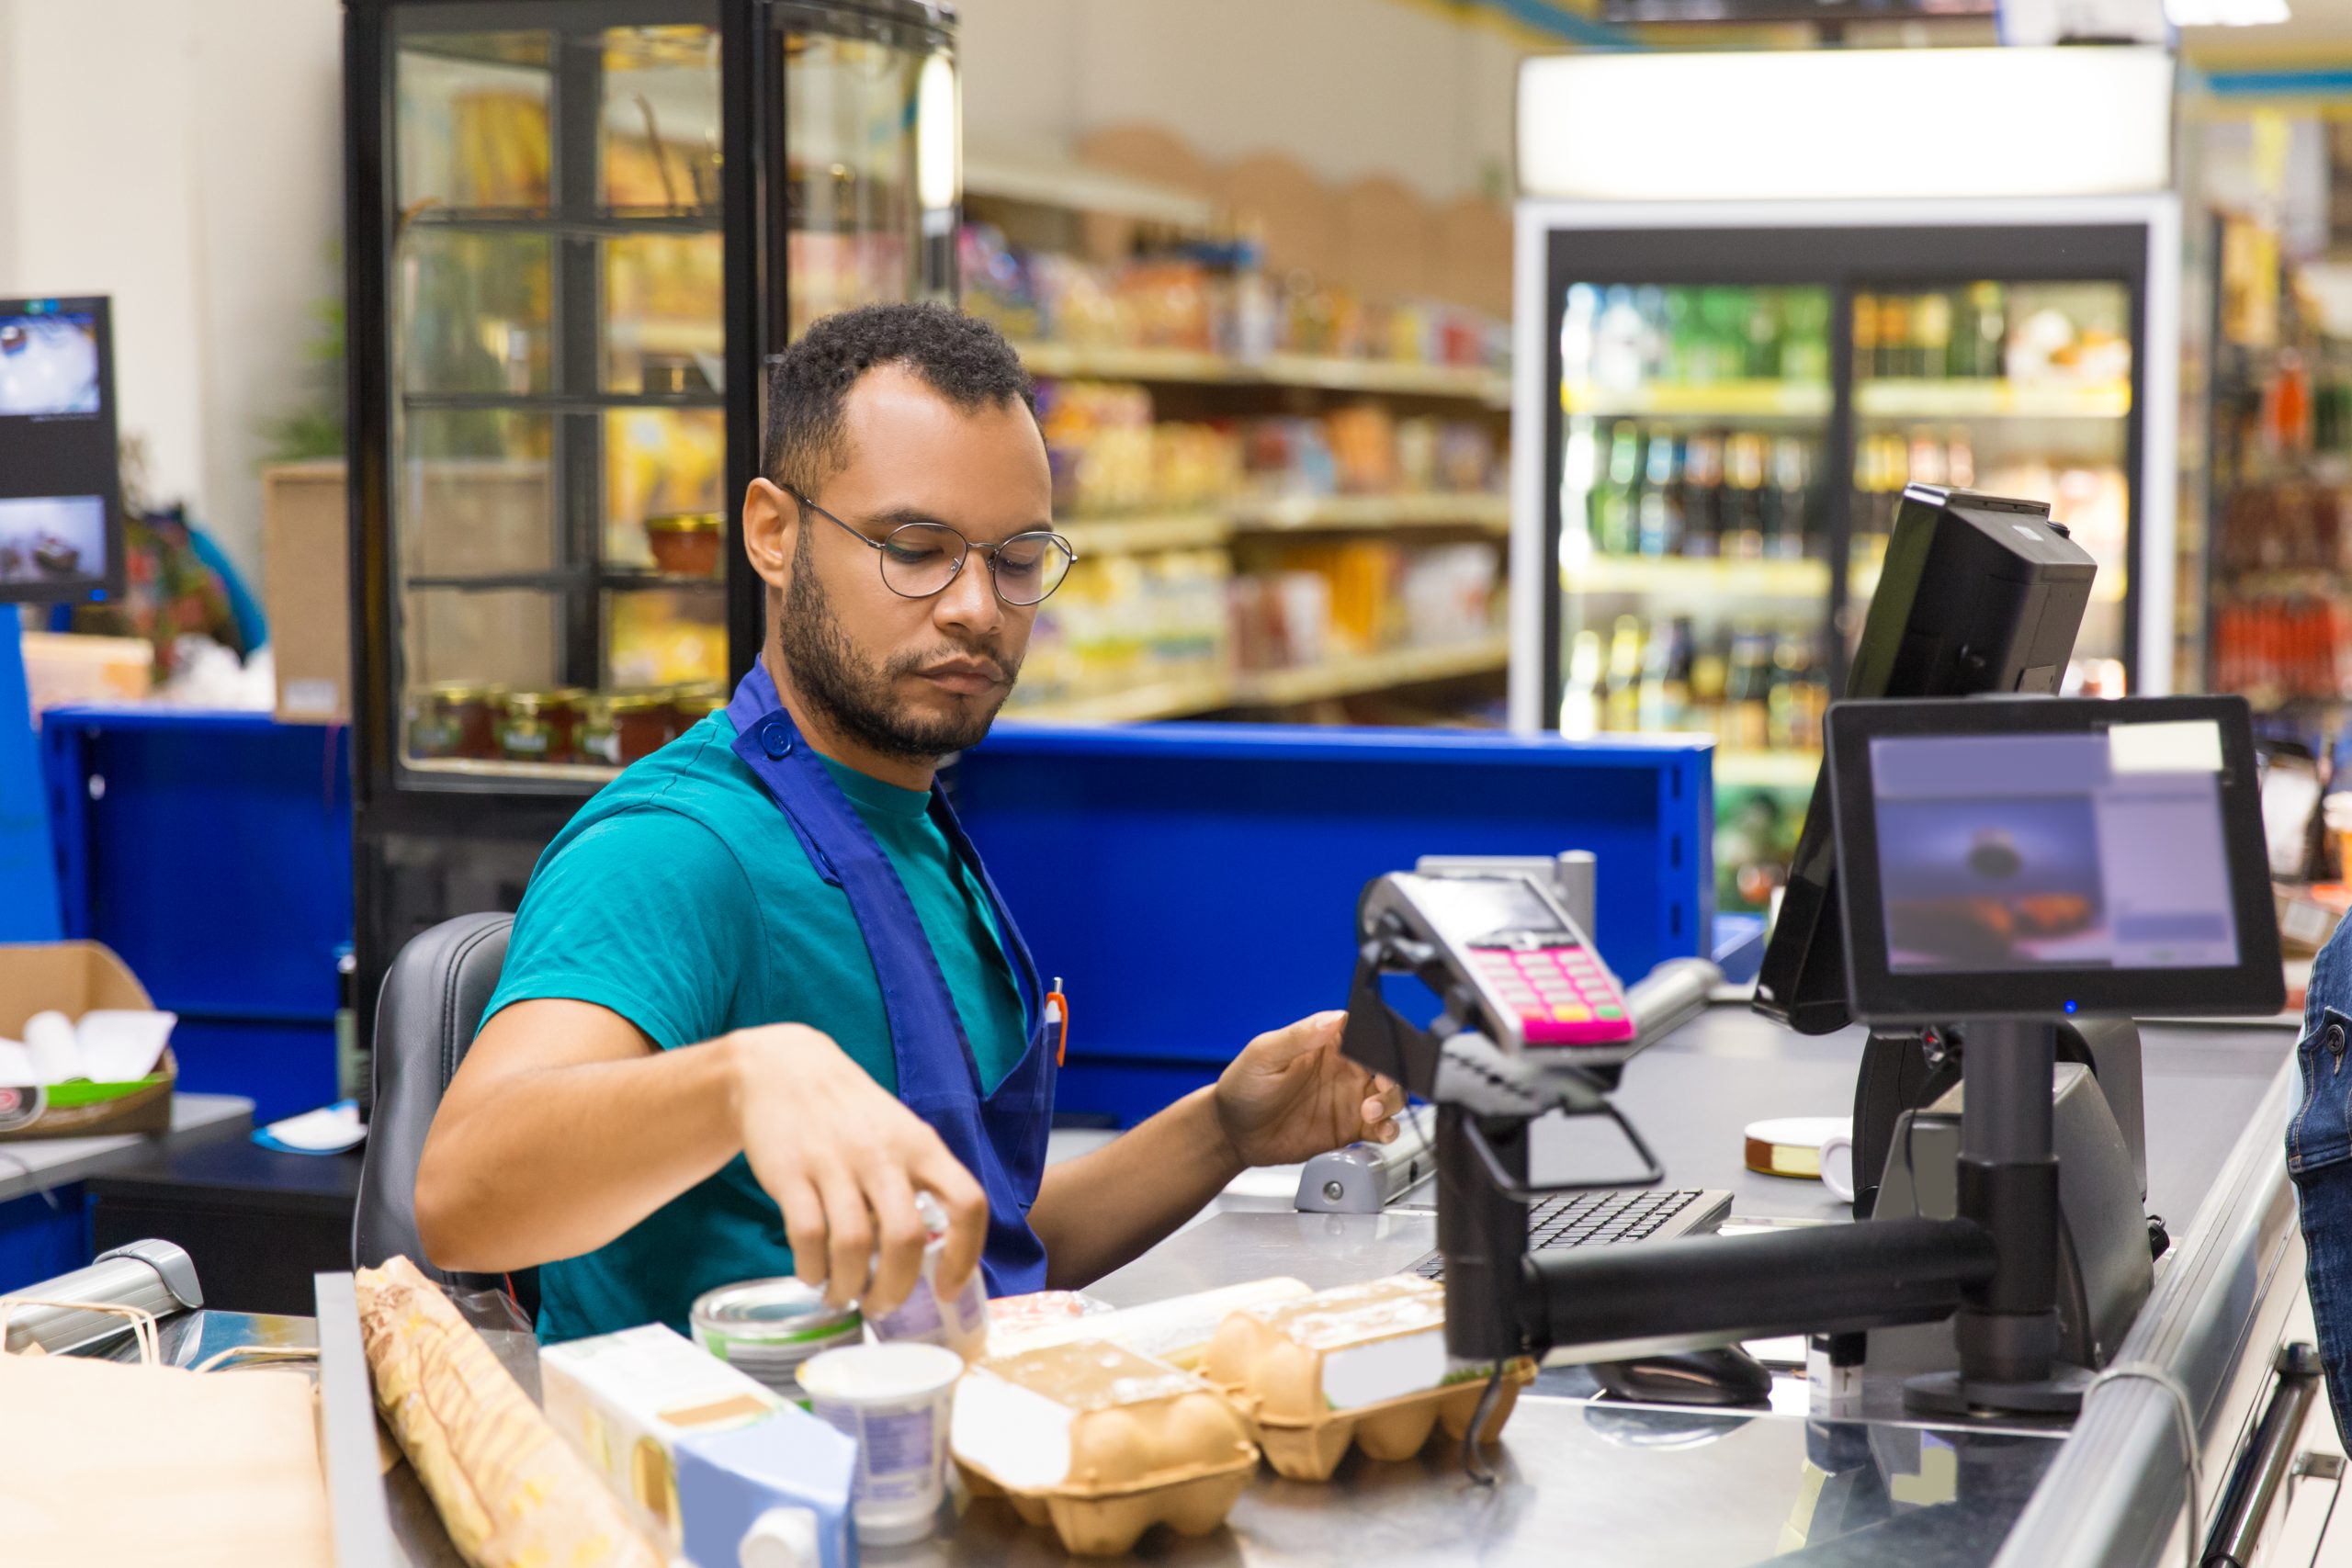 Labor nationalization in MENA and what it means for retail operations